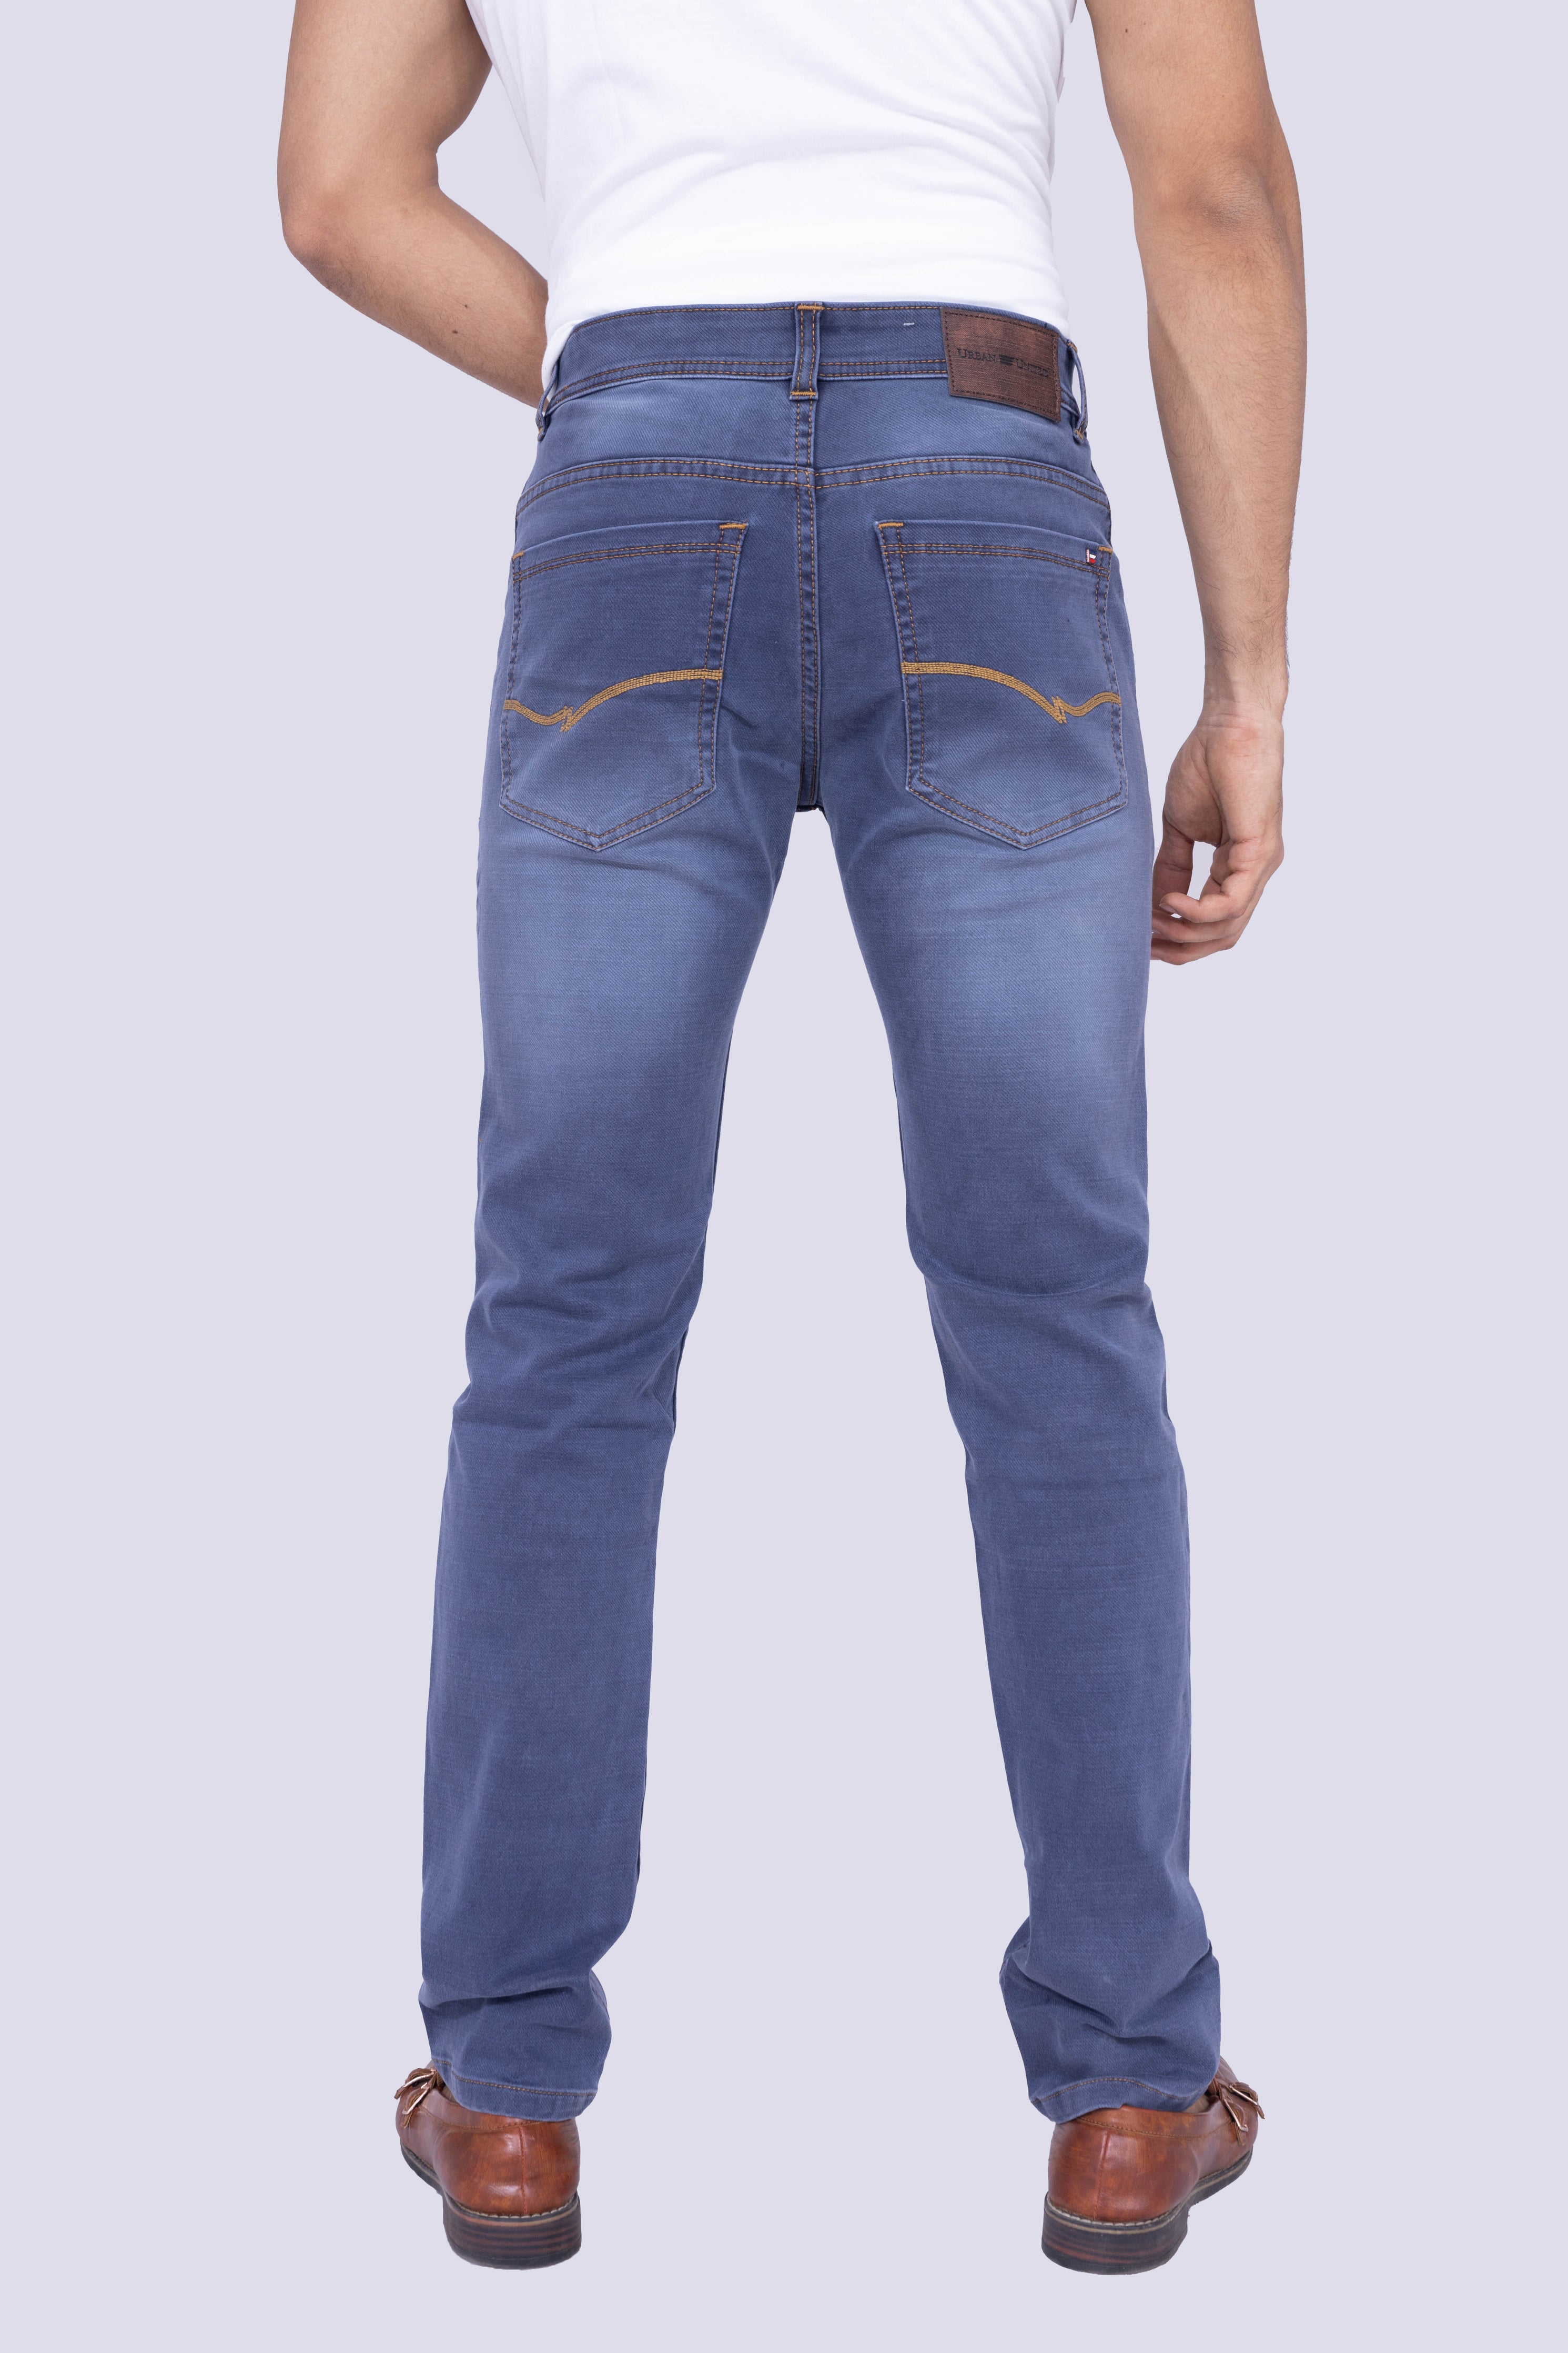 Knitted Carbon Blue jeans with yellow stitch pocket details